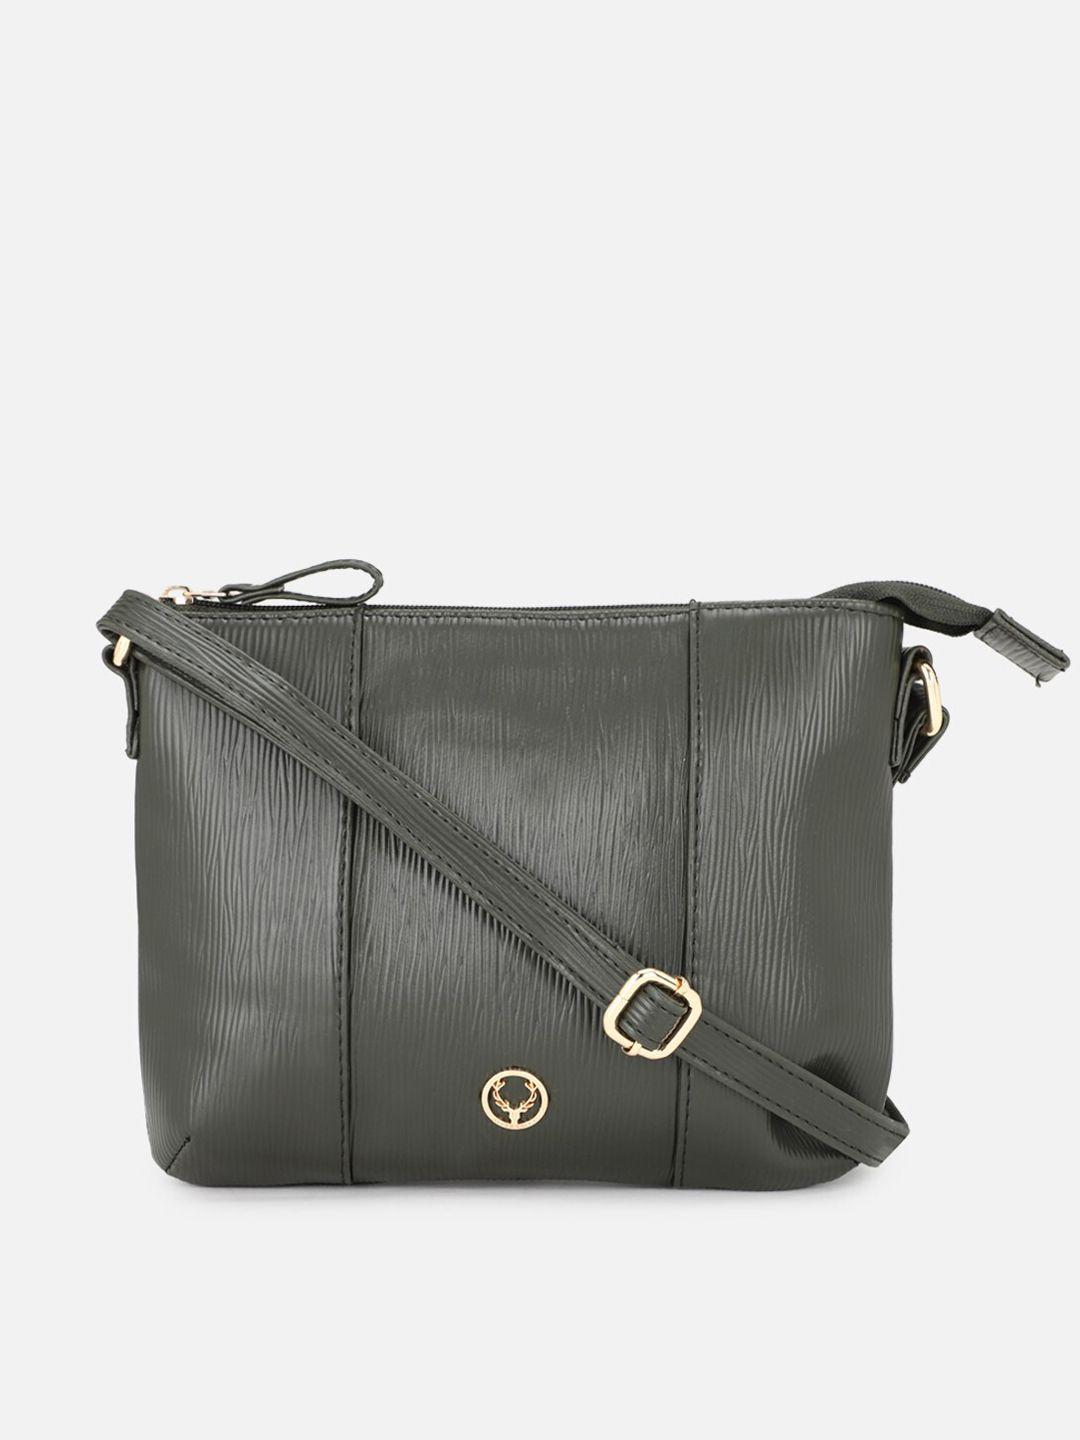 allen solly olive green textured pu structured sling bag